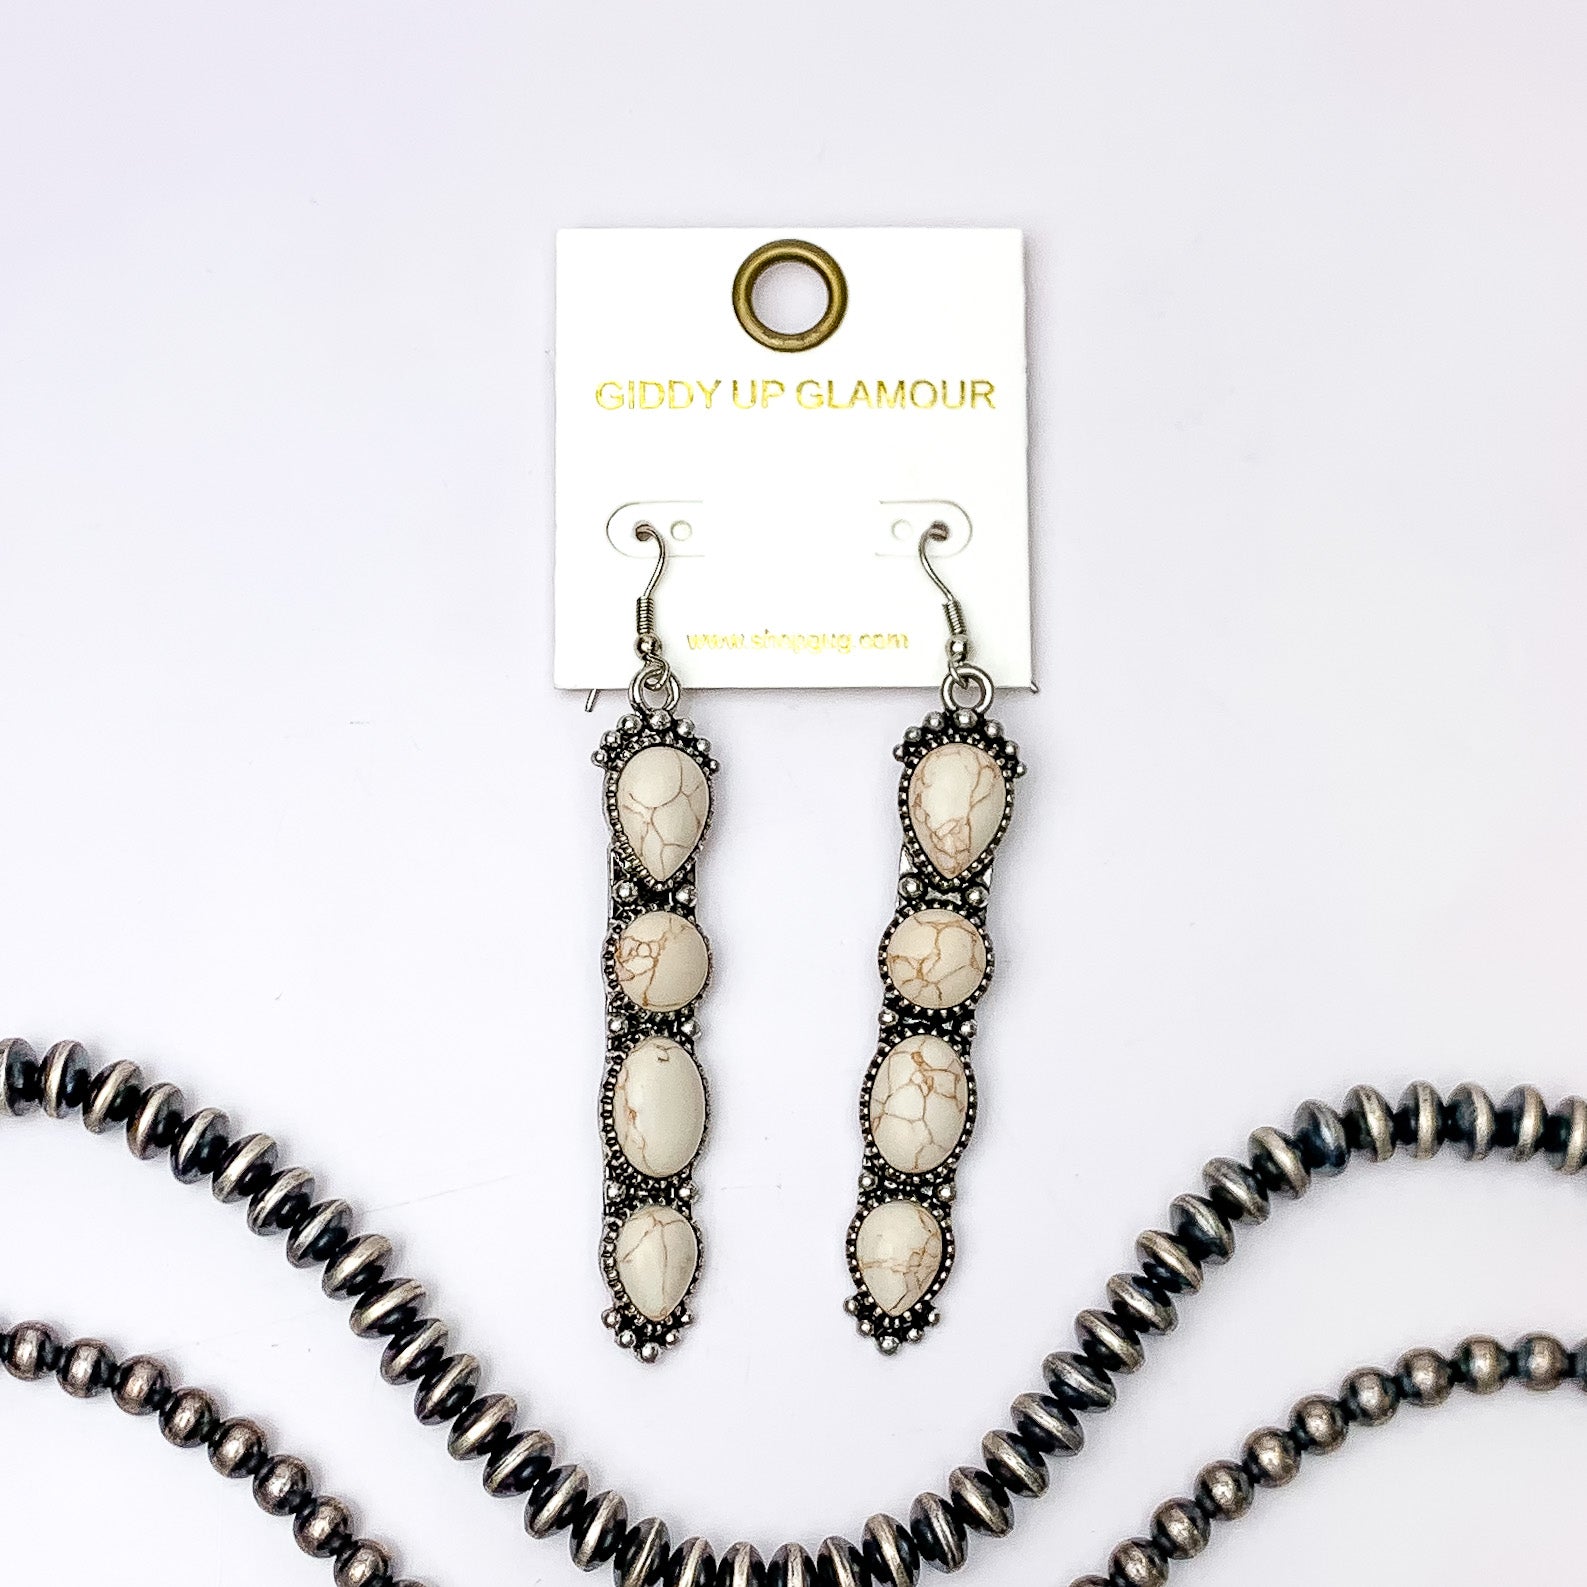 Silver fish hook earrings with a four, ivory stone pendant. These earrings are pictured on a white background with silver beads at the bottom of the picture. 